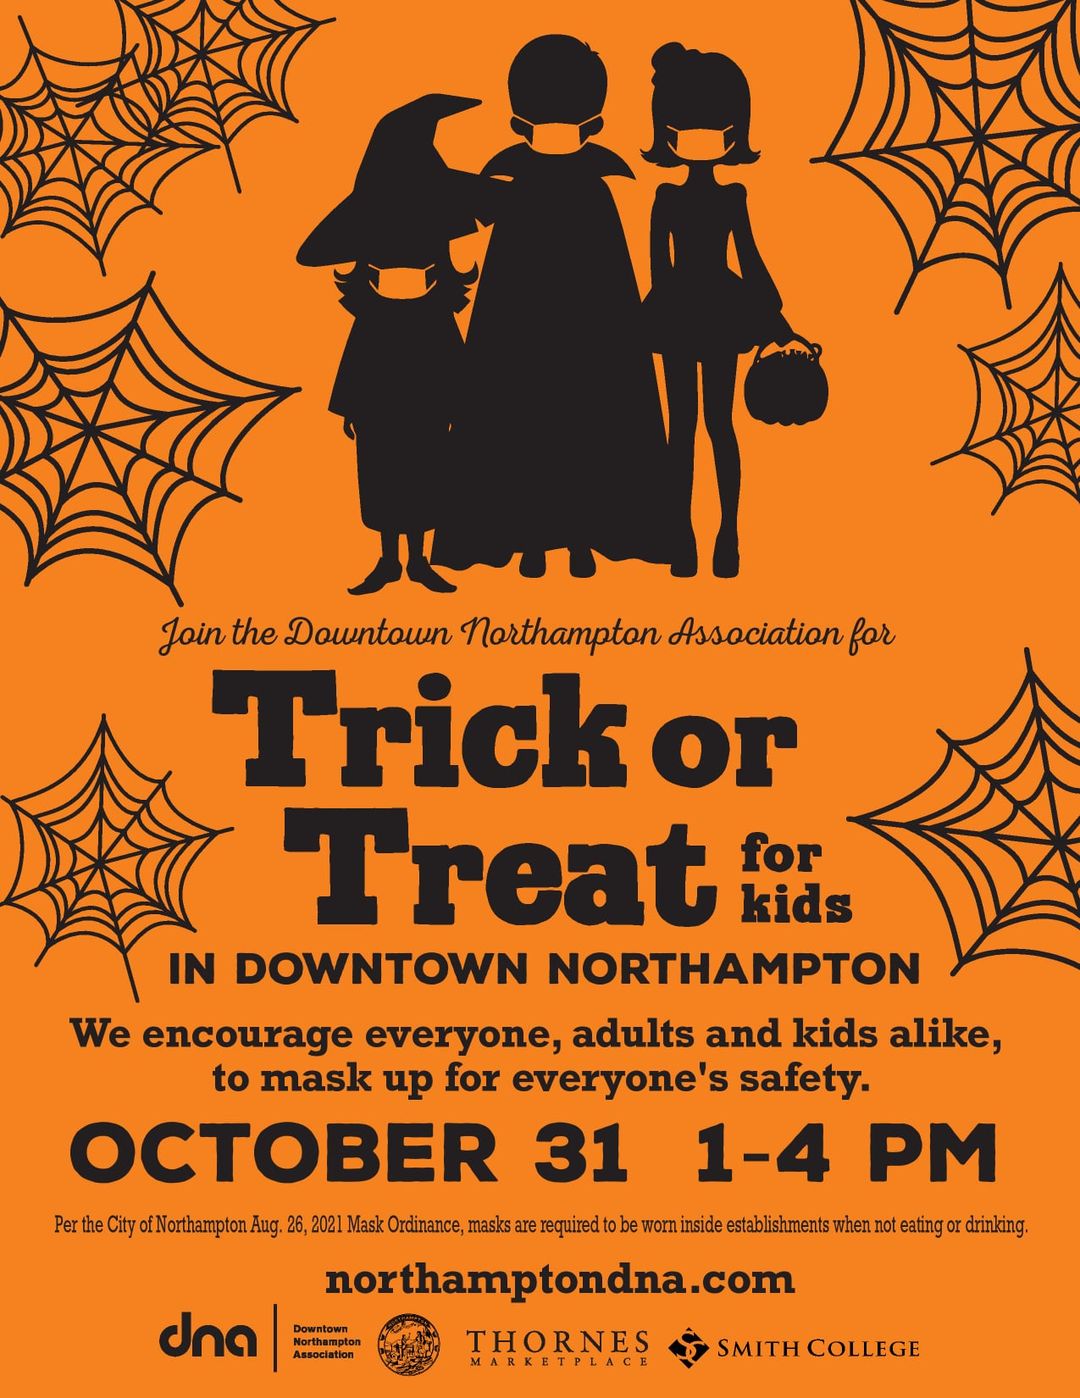 Trick or Treat for Kids in Downtown Northampton Sunday, October 31st